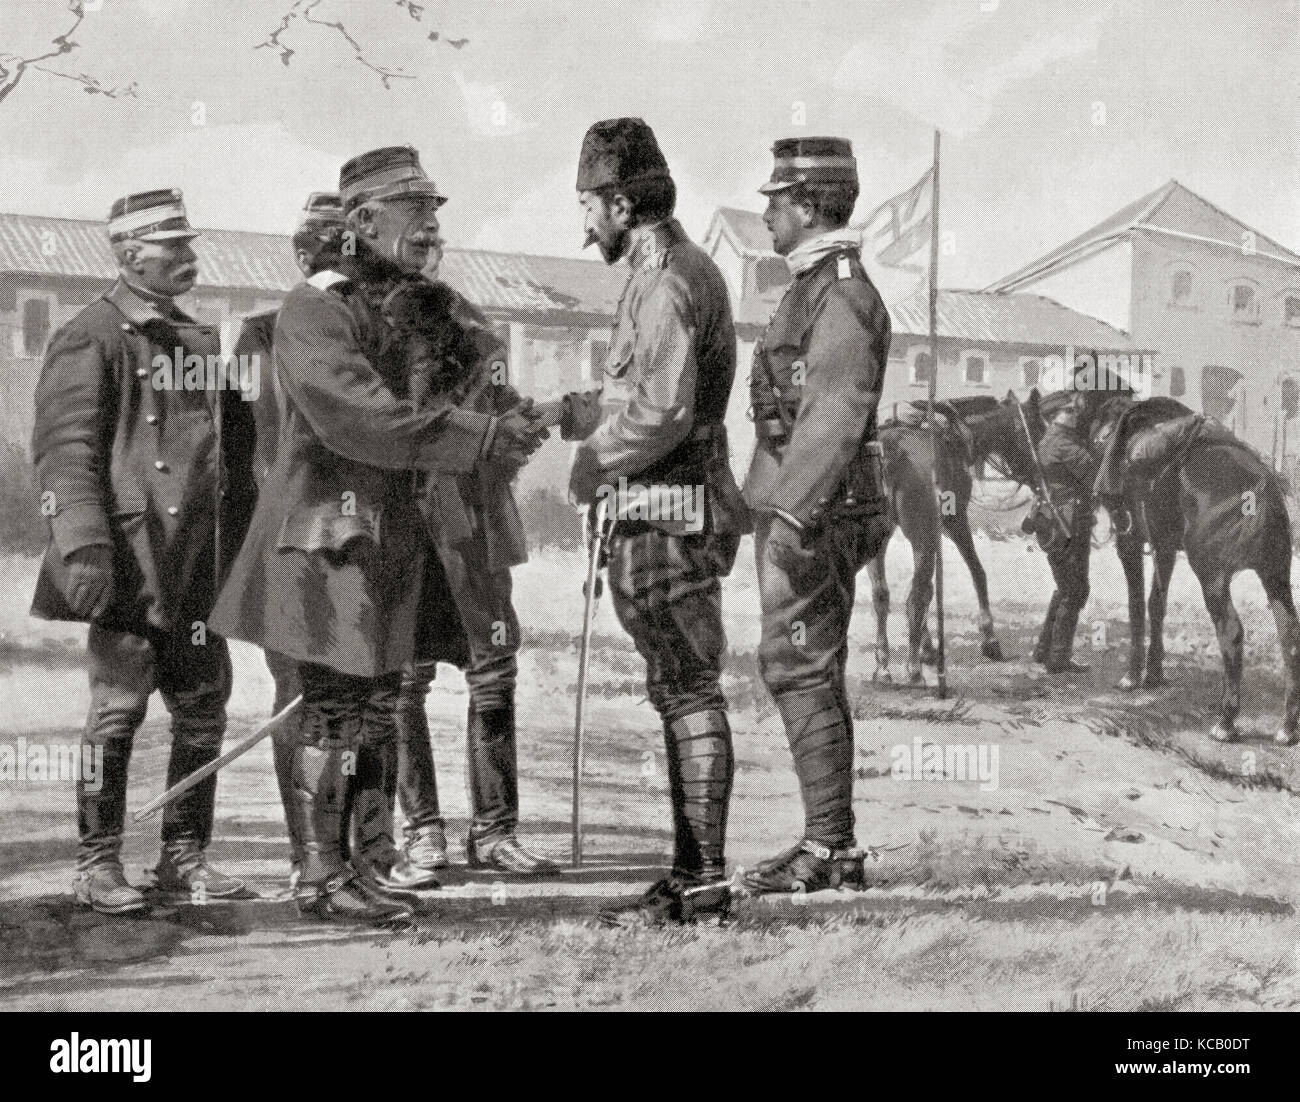 The surrender of Yanina to the Greek Army after the Battle of Bizani, 1913. Seen here, Greek Cavalry General Alexandros Soutsos (center left) shaking hands with the Ottoman representative, Major Vehib Bey.  From Hutchinson's History of the Nations, published 1915. Stock Photo